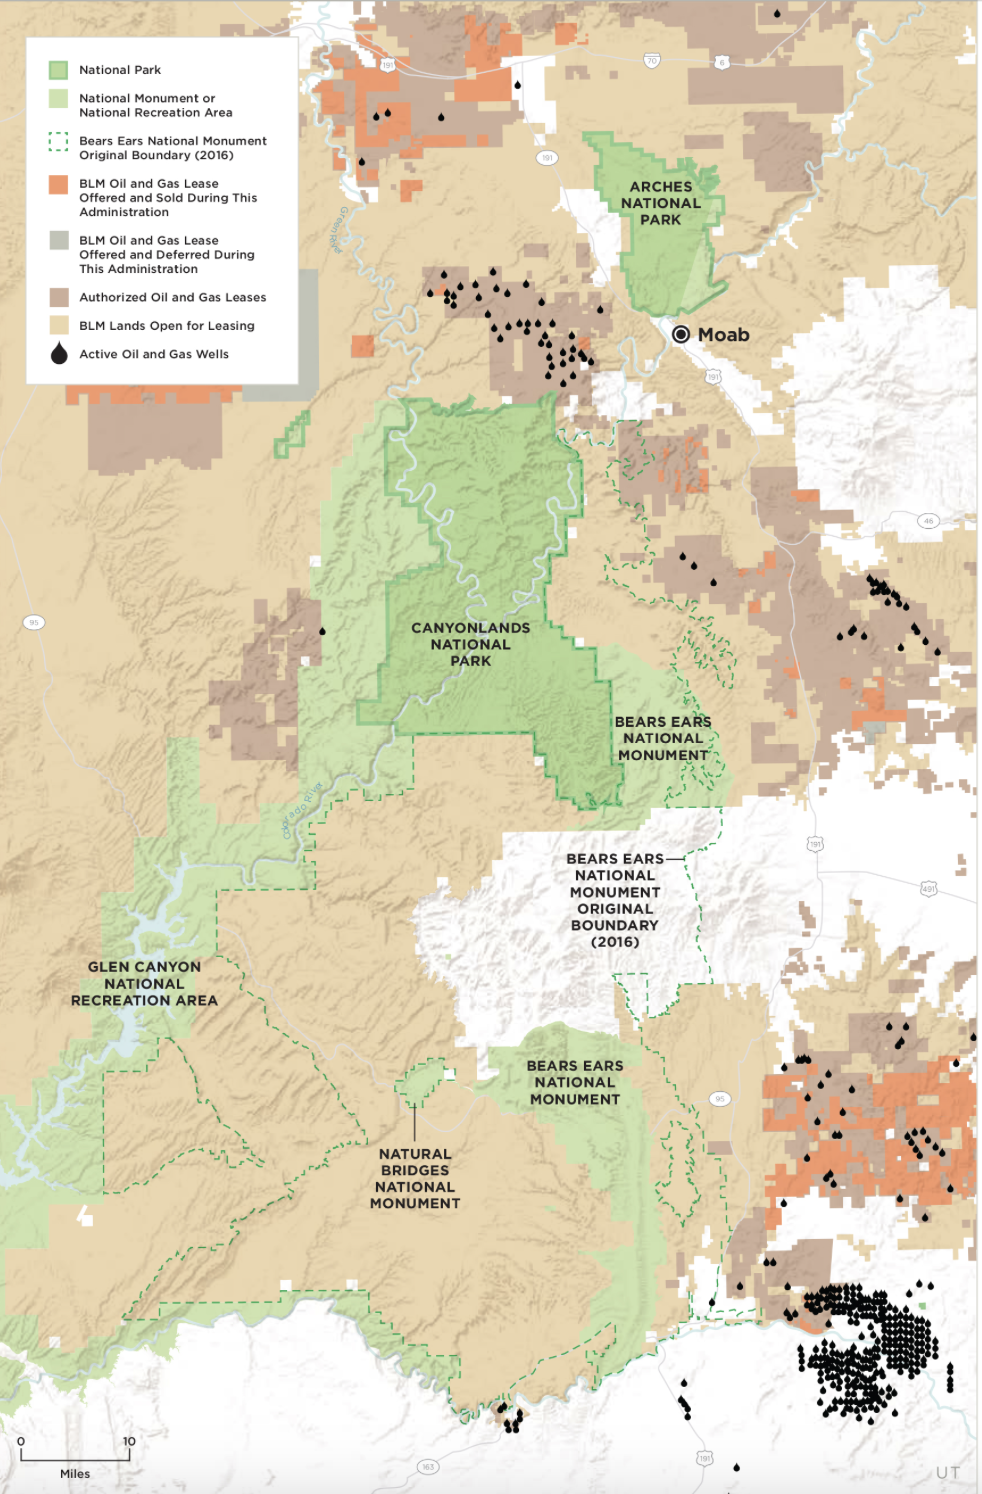 Map of Canyonlands National Parks and Bears Ears